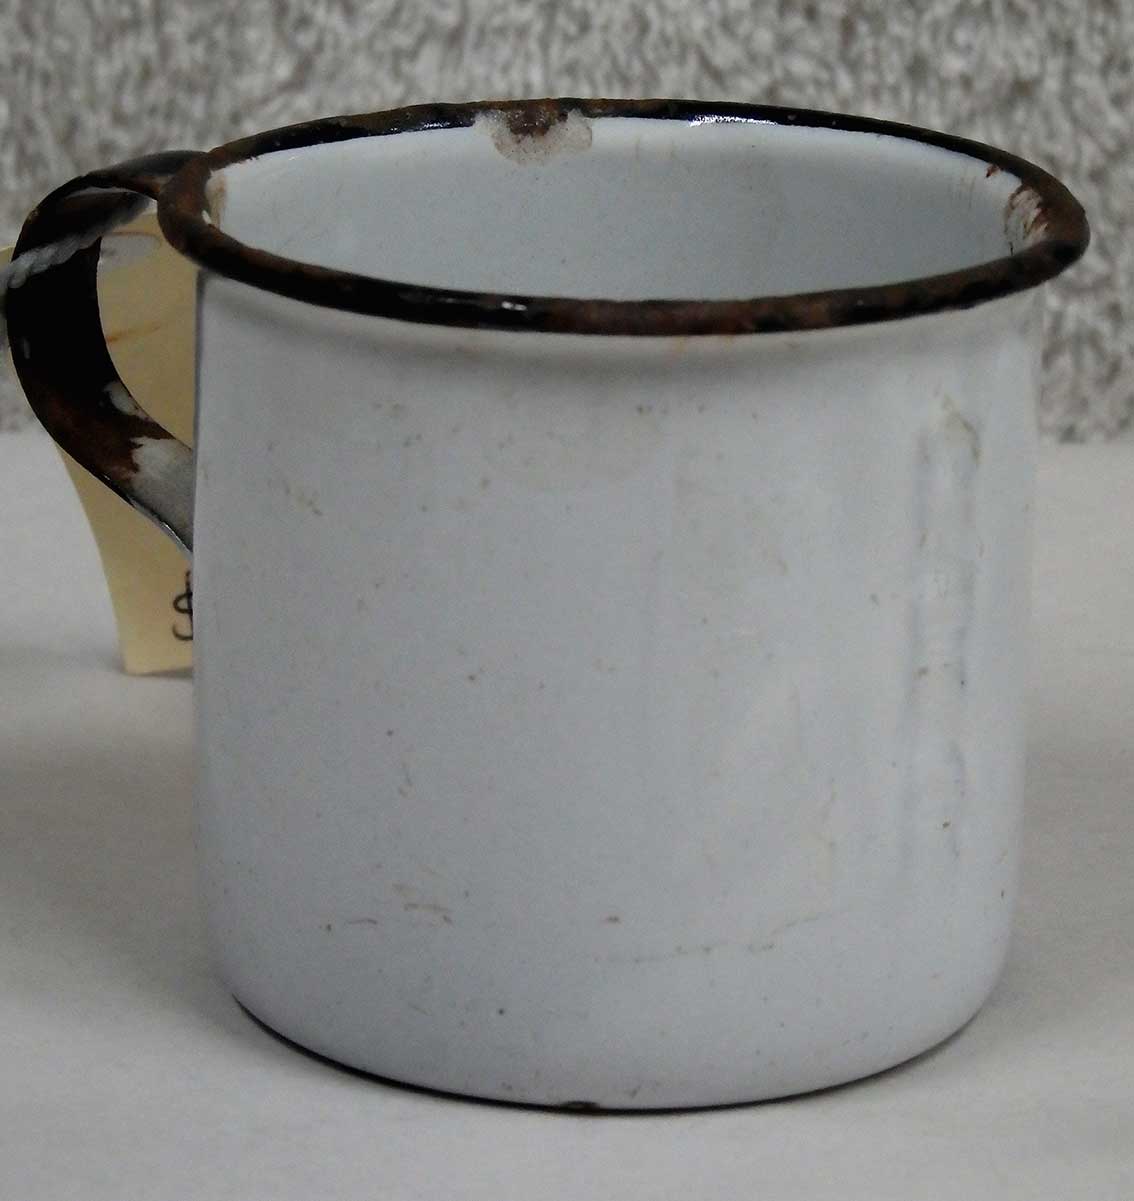 Original enamel railway refreshment mug, stamped RRR vertically down the front, for sale at Heath's Old Wares 19-21 Broadway Burringbar NSW Ph: 0266771181 open 7 days